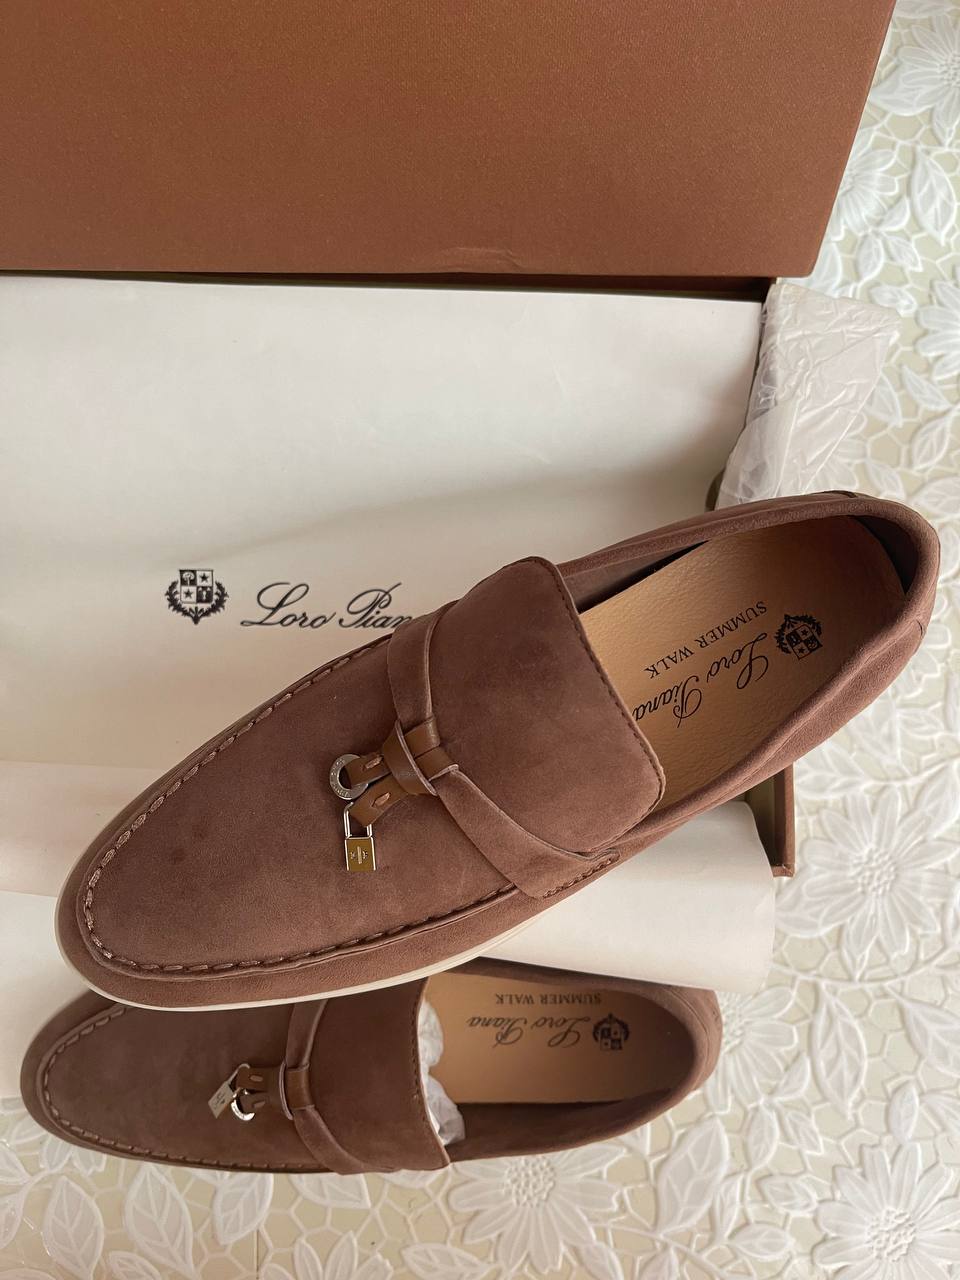 Loro Piana / suede лоферы (37 the size) фото 3